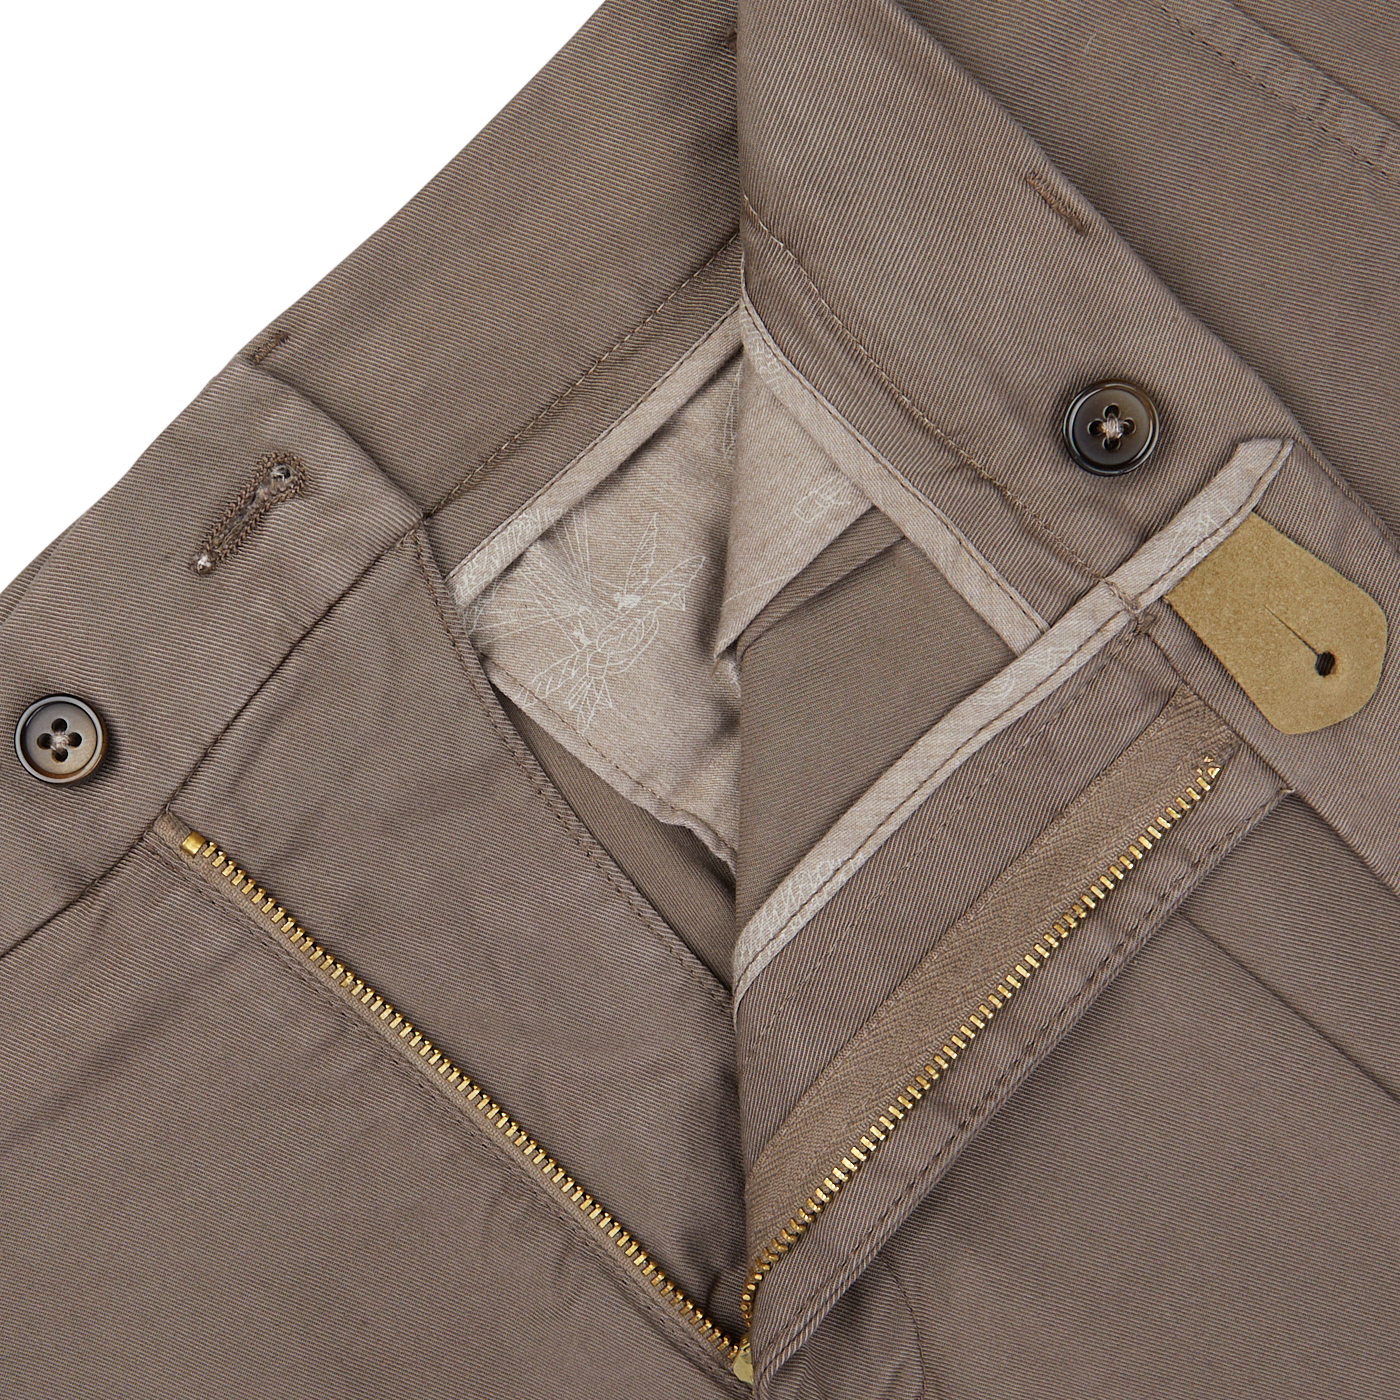 Light Brown Cotton Blend Pleated Shorts from Berwich with zipper and button details on a white background.